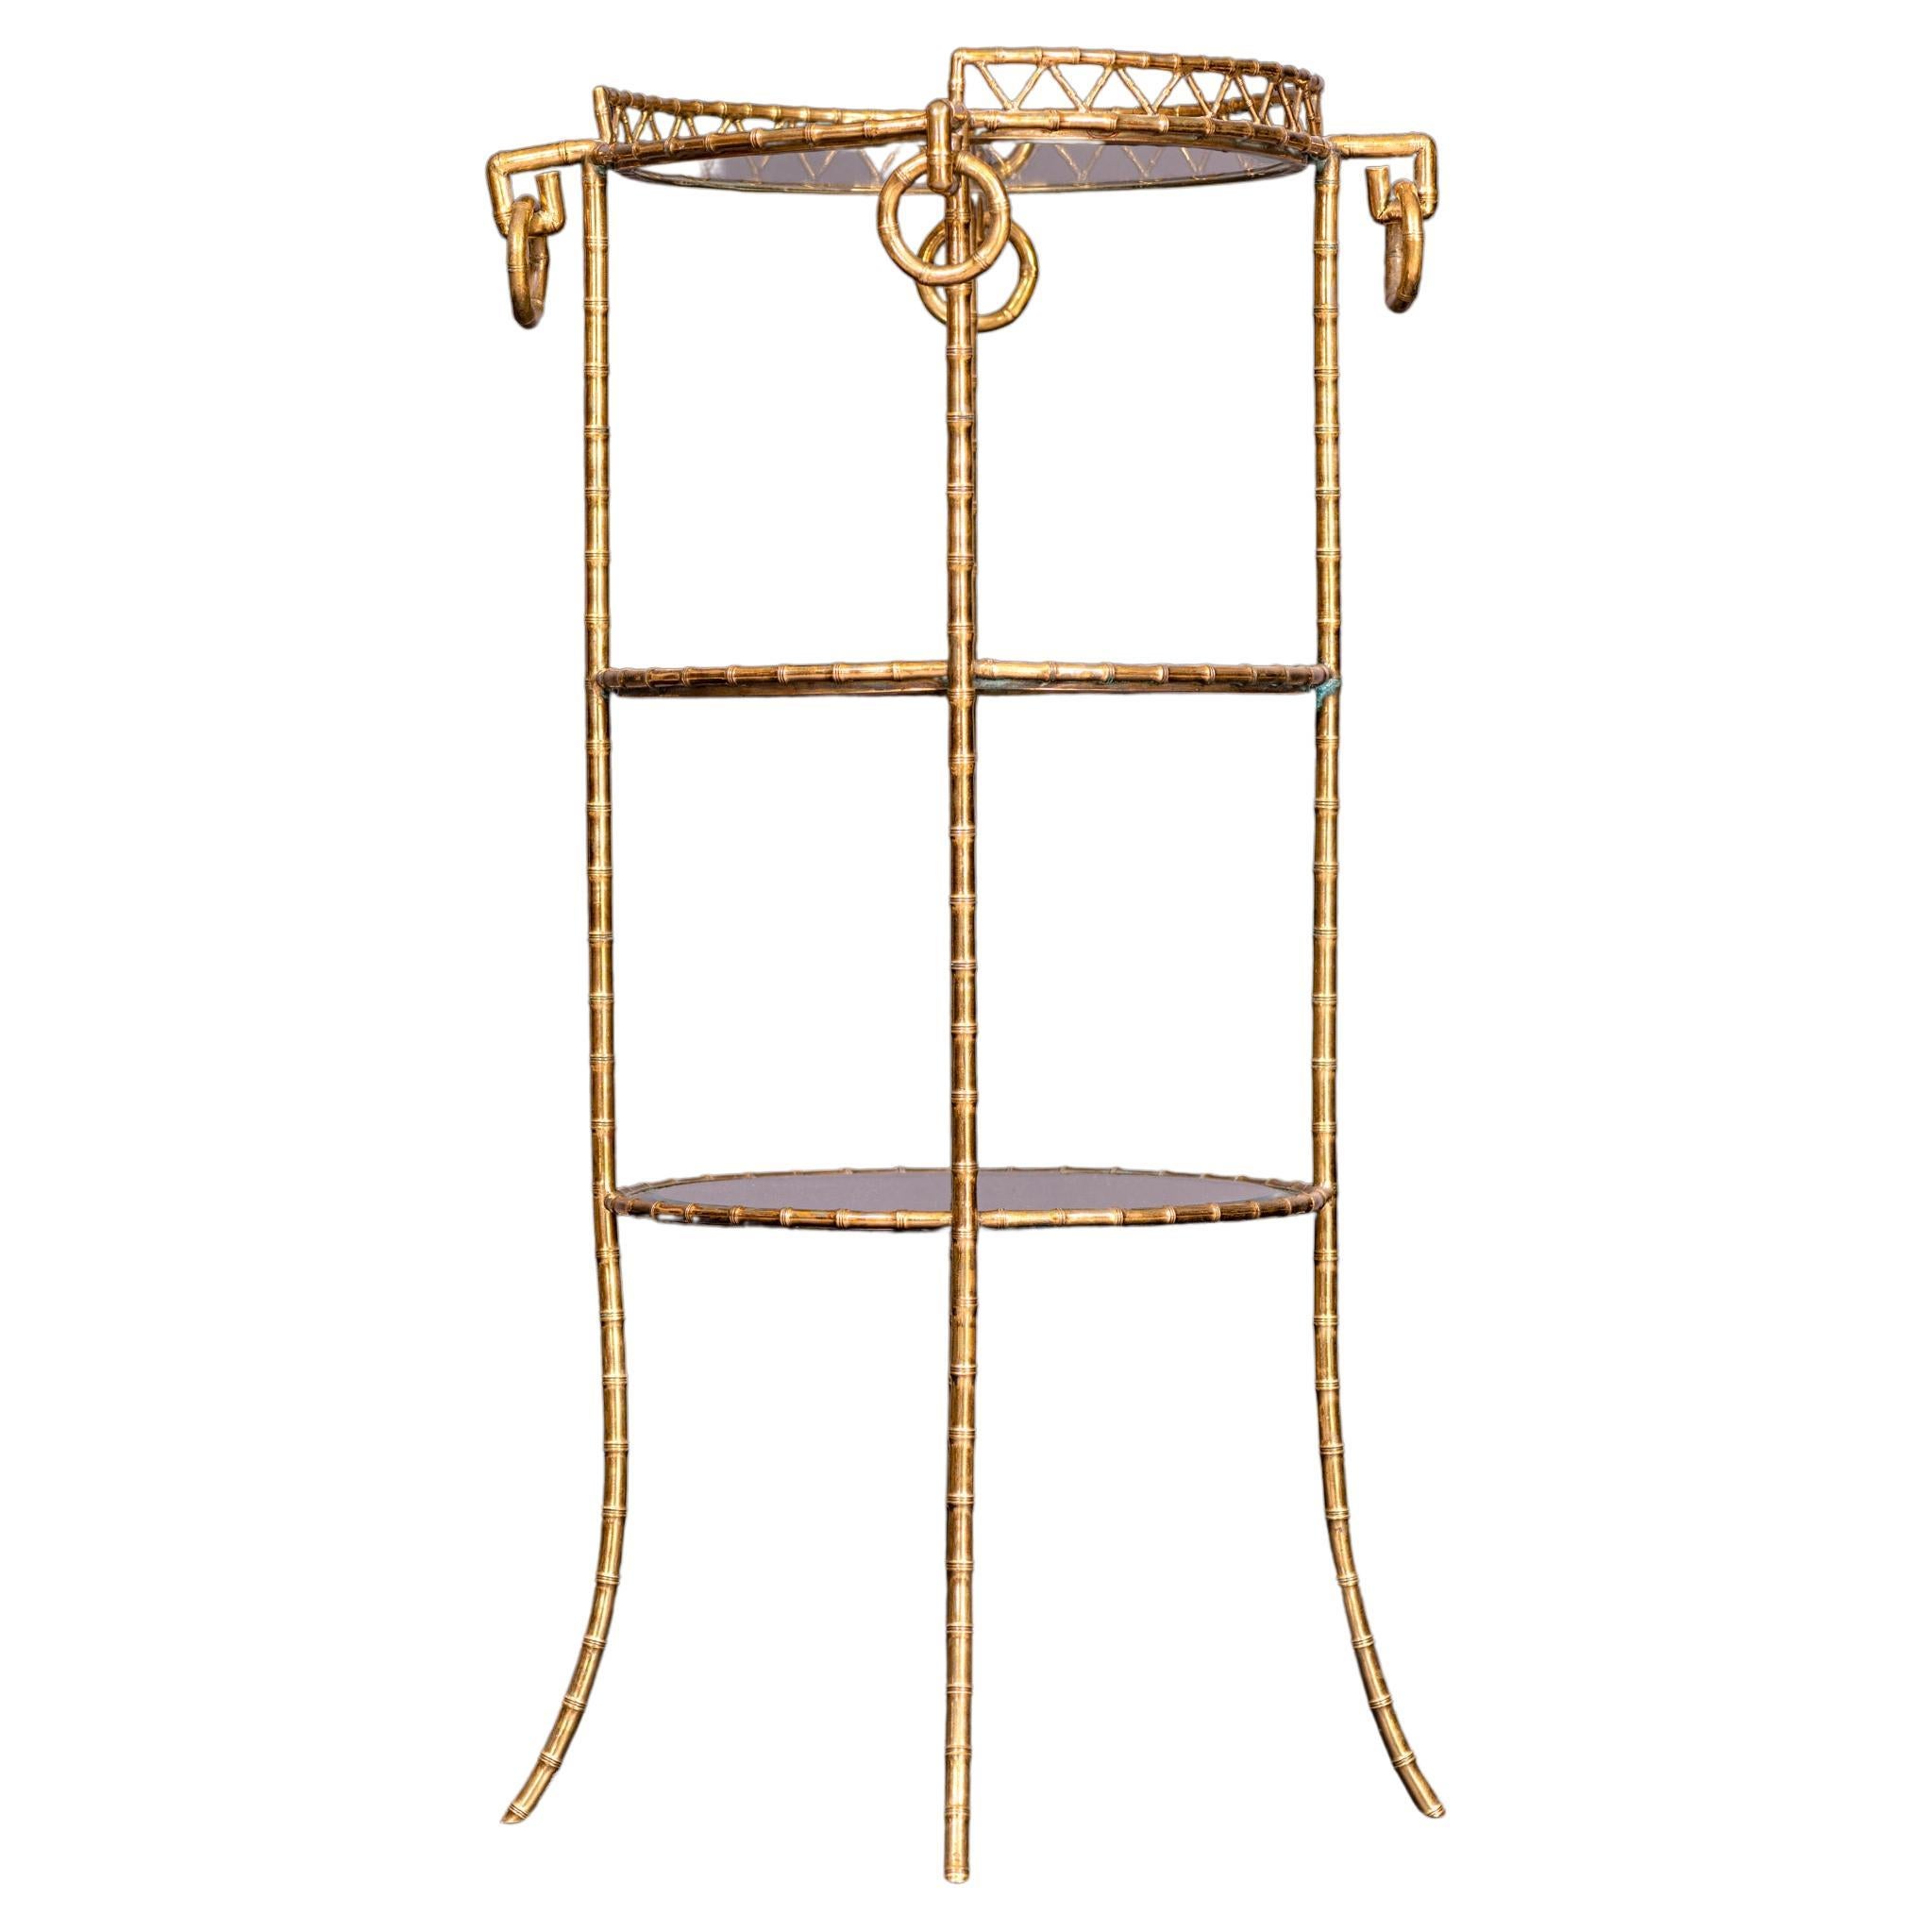 A Napoleon III ormolu and glass etagere by Maison Alphonse Giroux, cast as faux bamboo, with three circular tiers each with a glass shelf, stamped 'MAISON ALPH. GIROUX PARIS' to the top front rim.

Literature:

C. Payne, Paris Furniture: the luxury